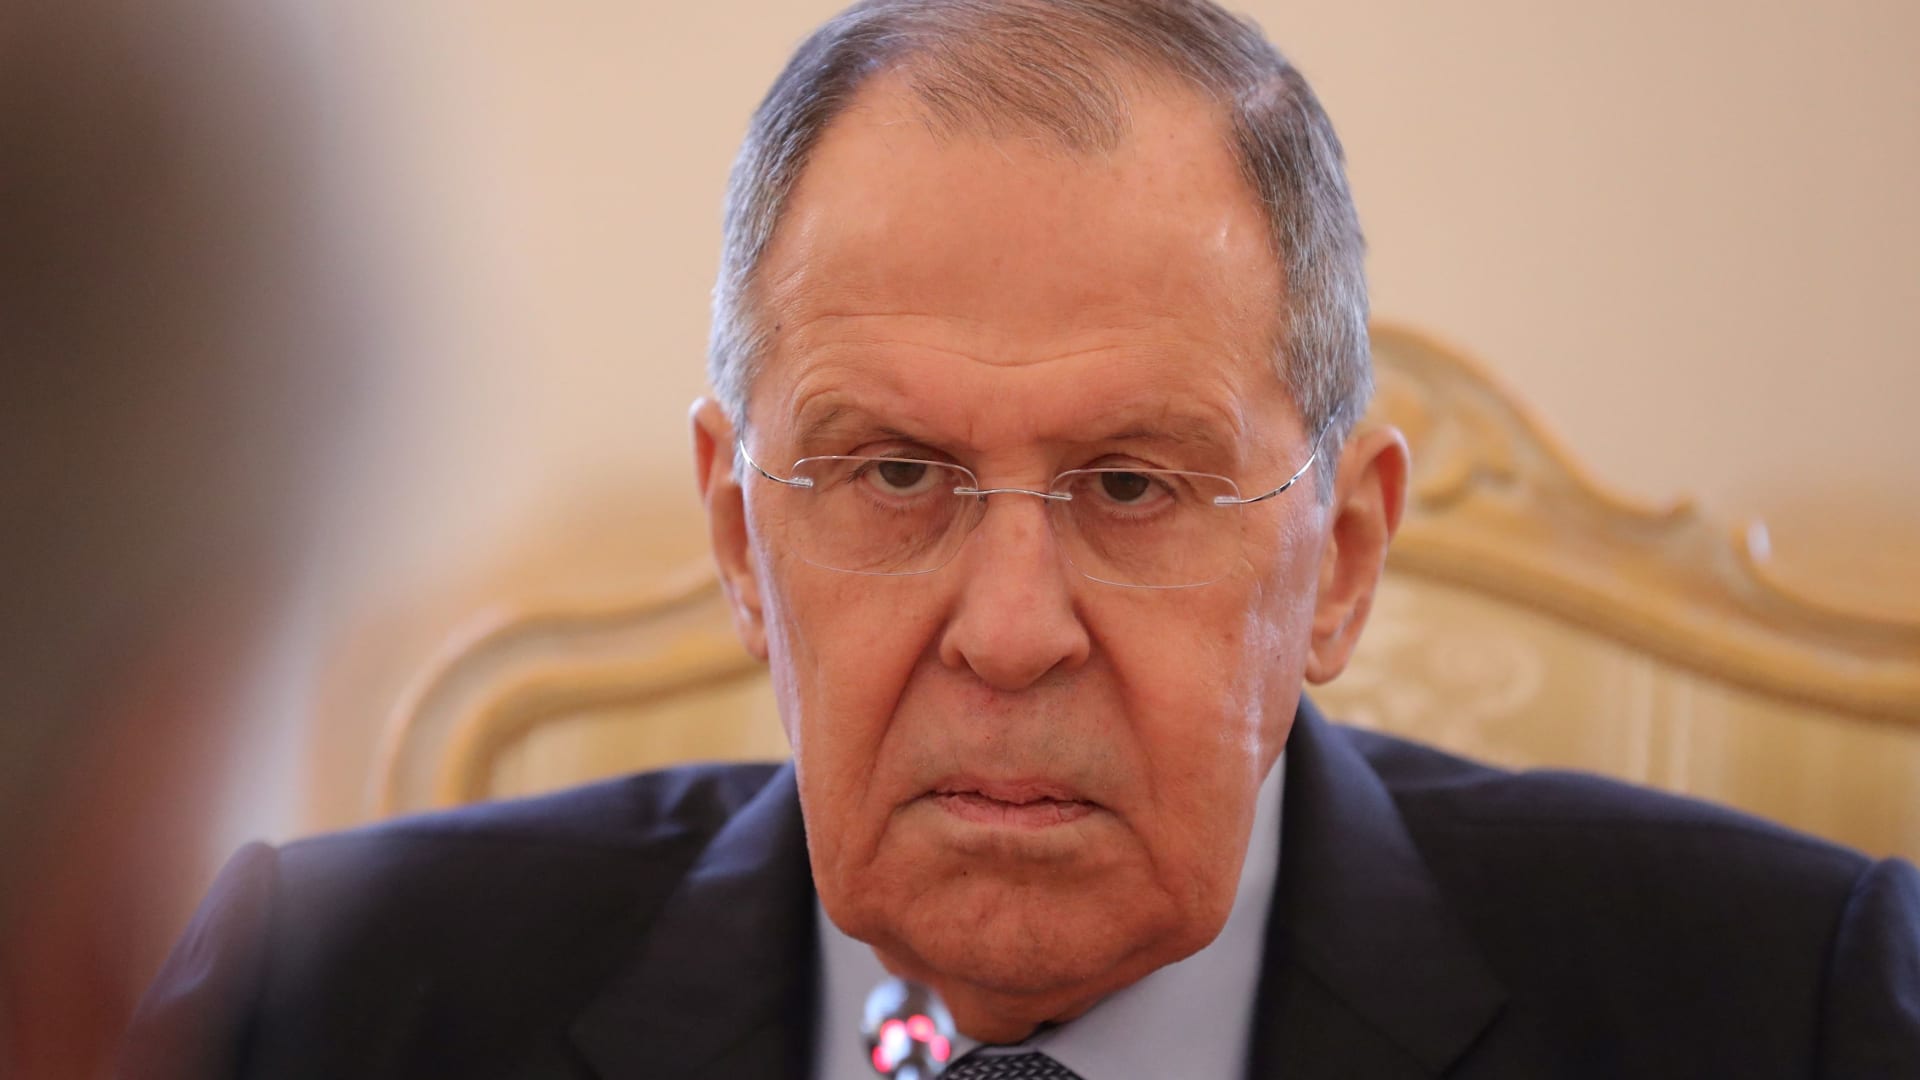 Russian Foreign Minister Sergei Lavrov looks on during his meeting with UN Secretary-General Antonio Guterres in Moscow, Russia, April 26, 2022.